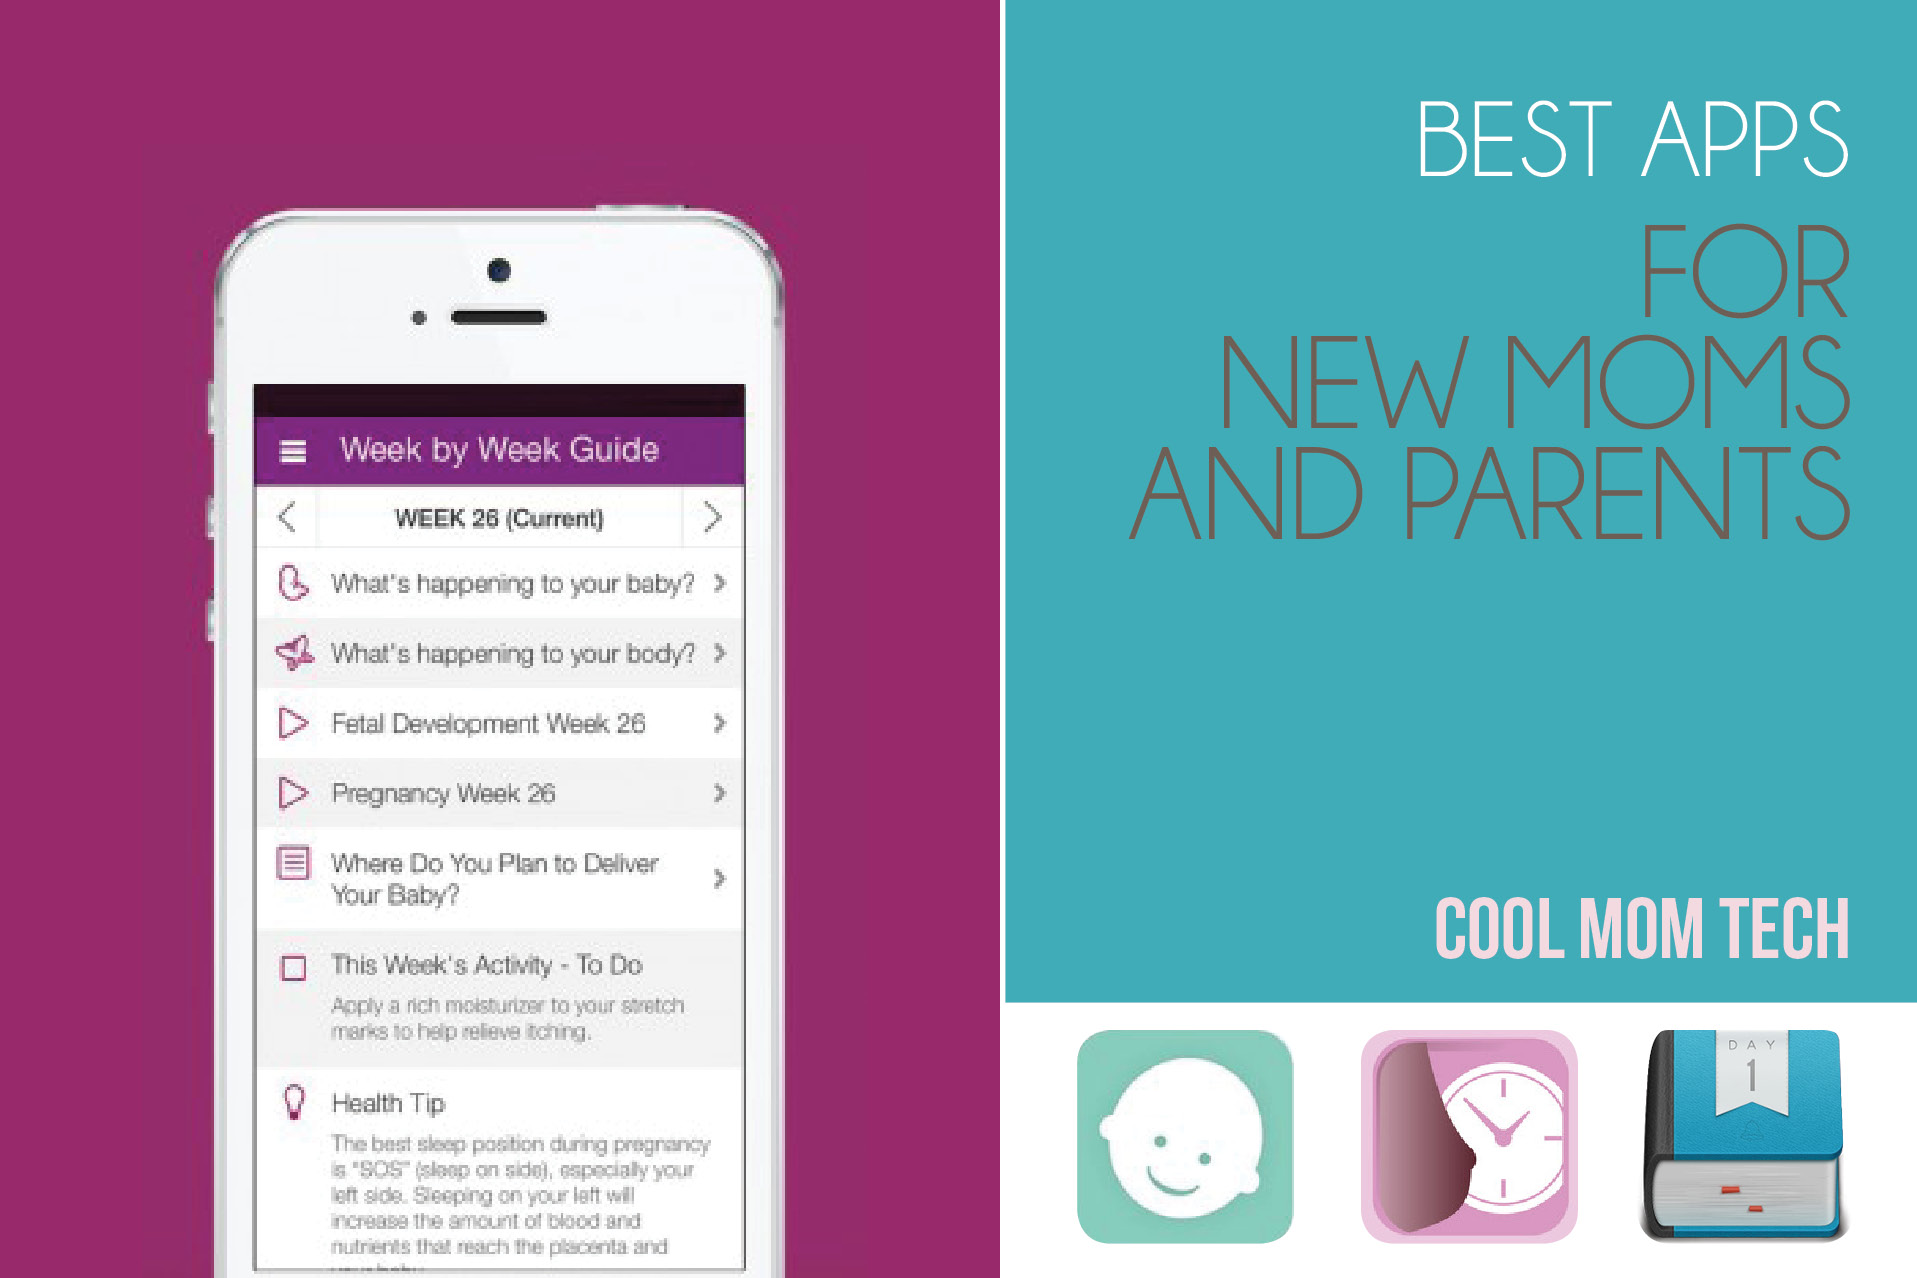 10 of the best apps for new moms and parents